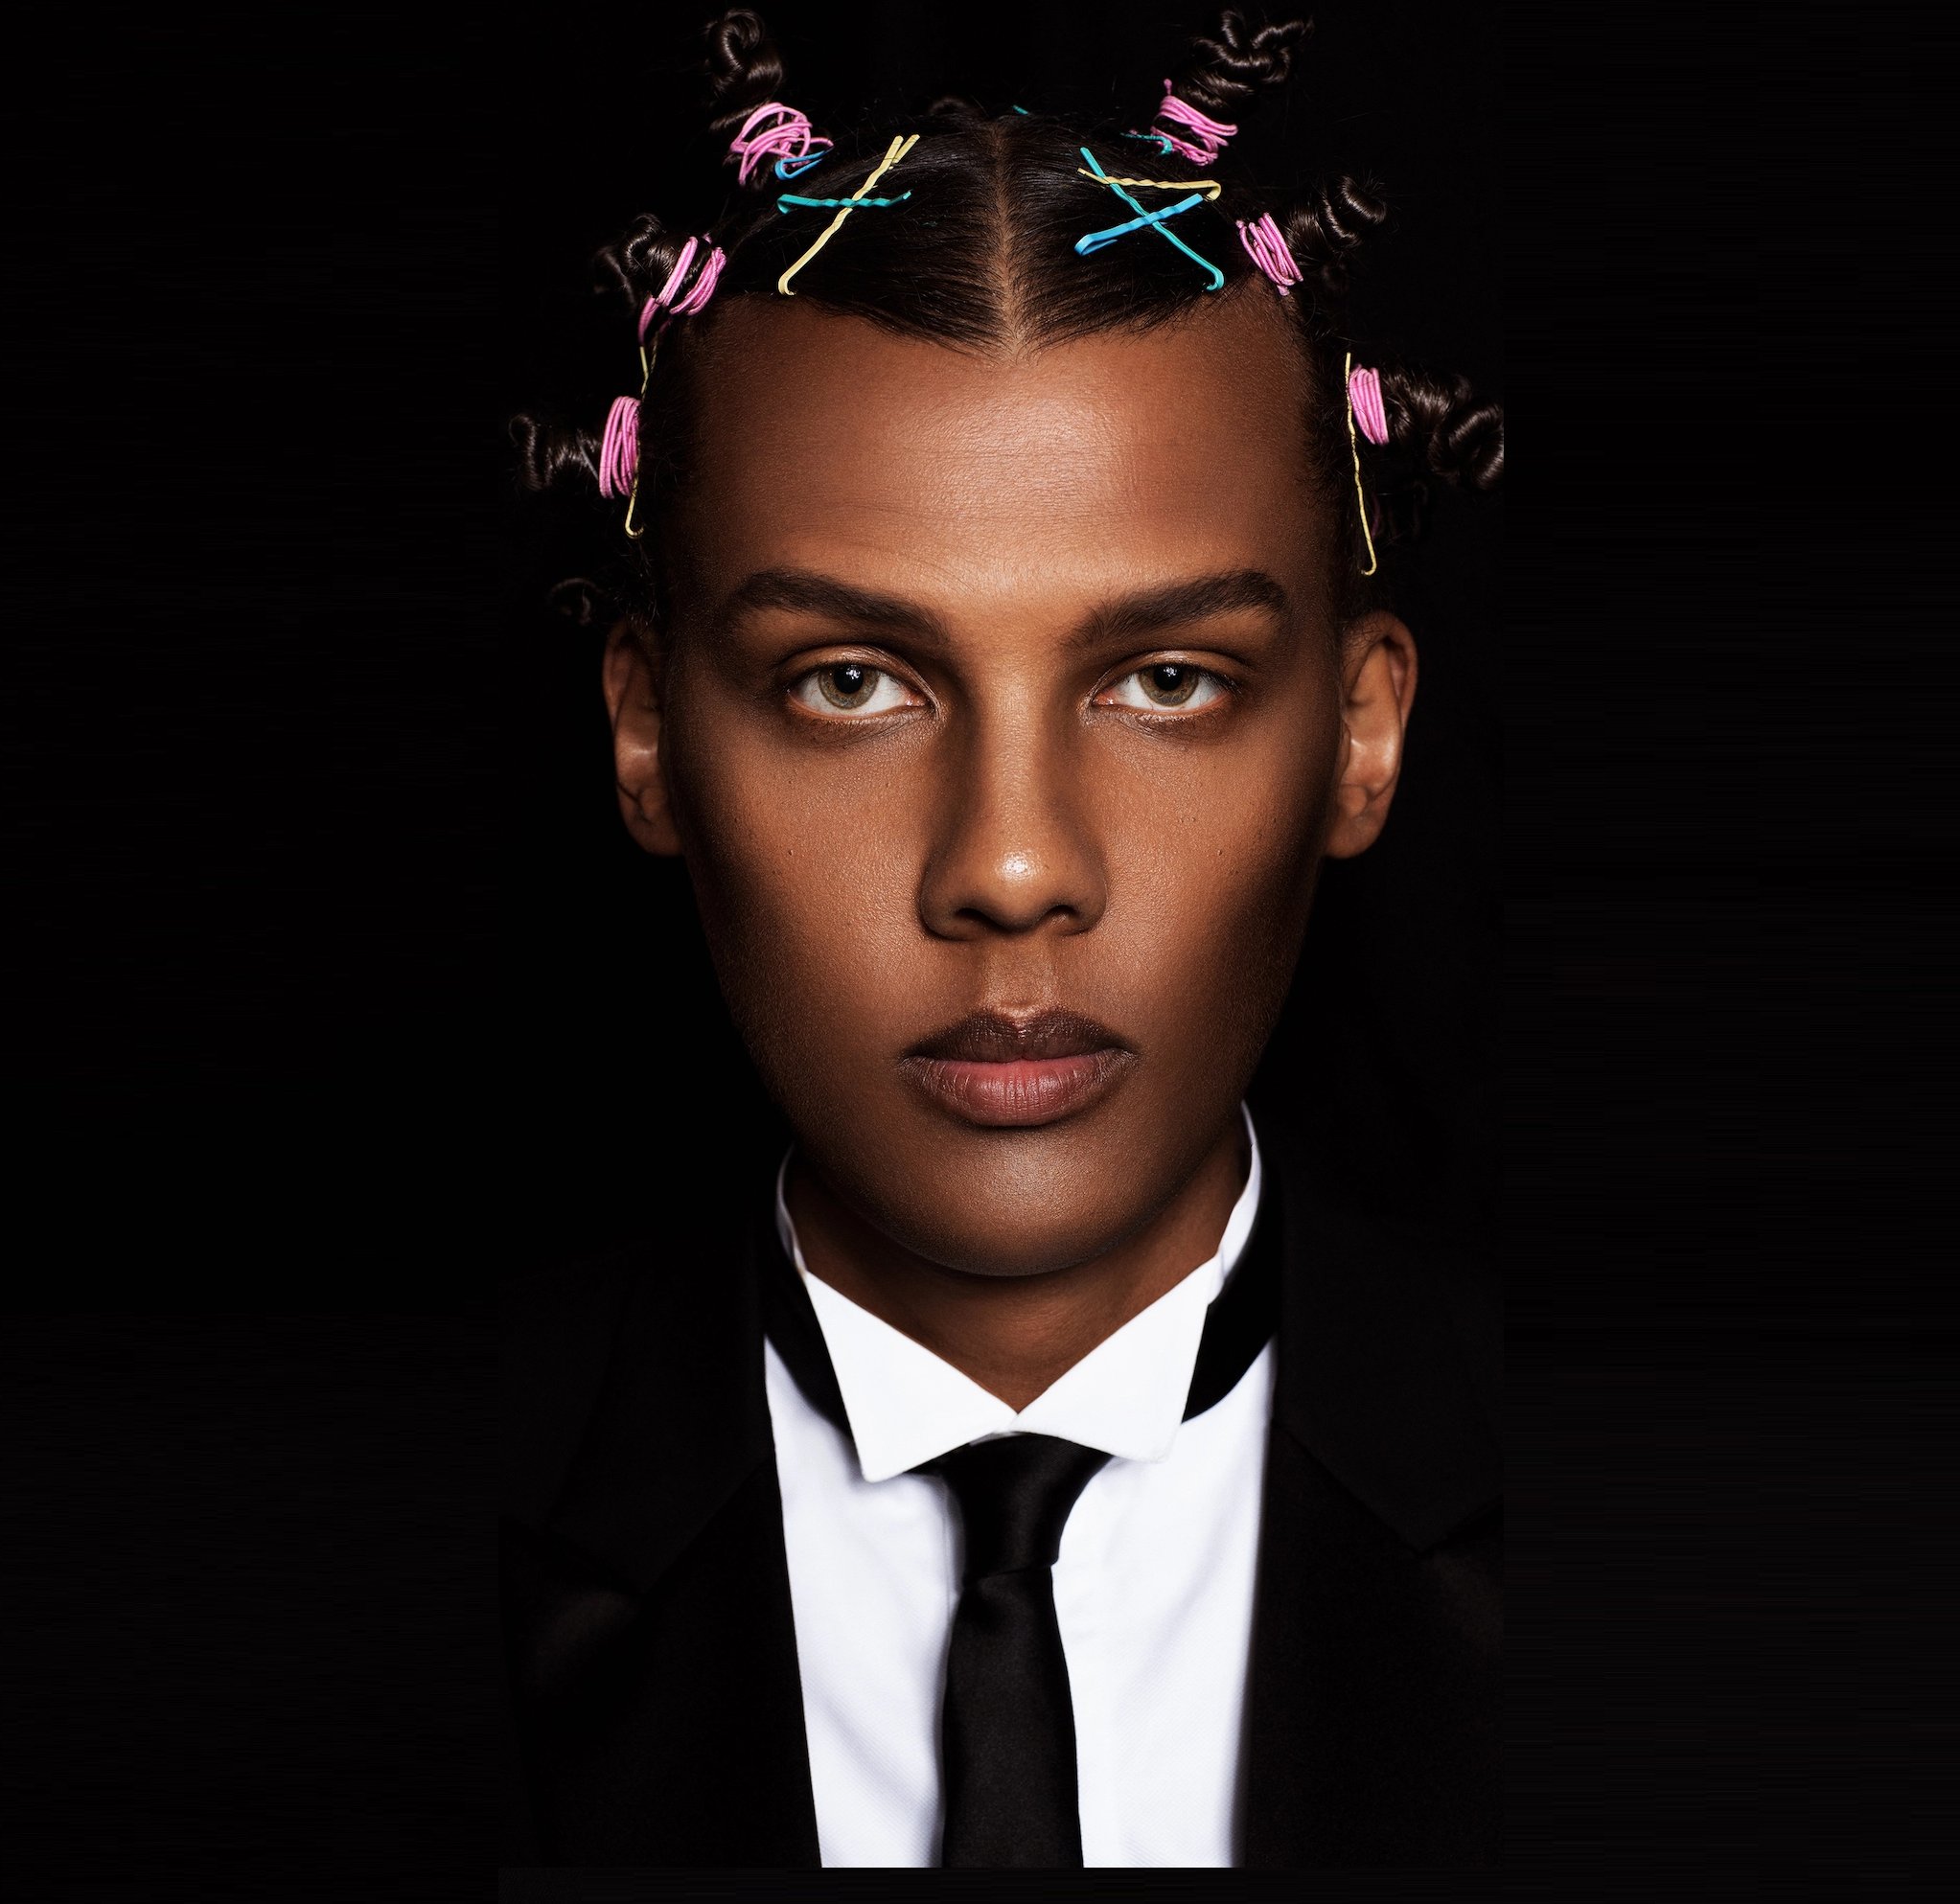 Stromae music, videos, stats, and photos